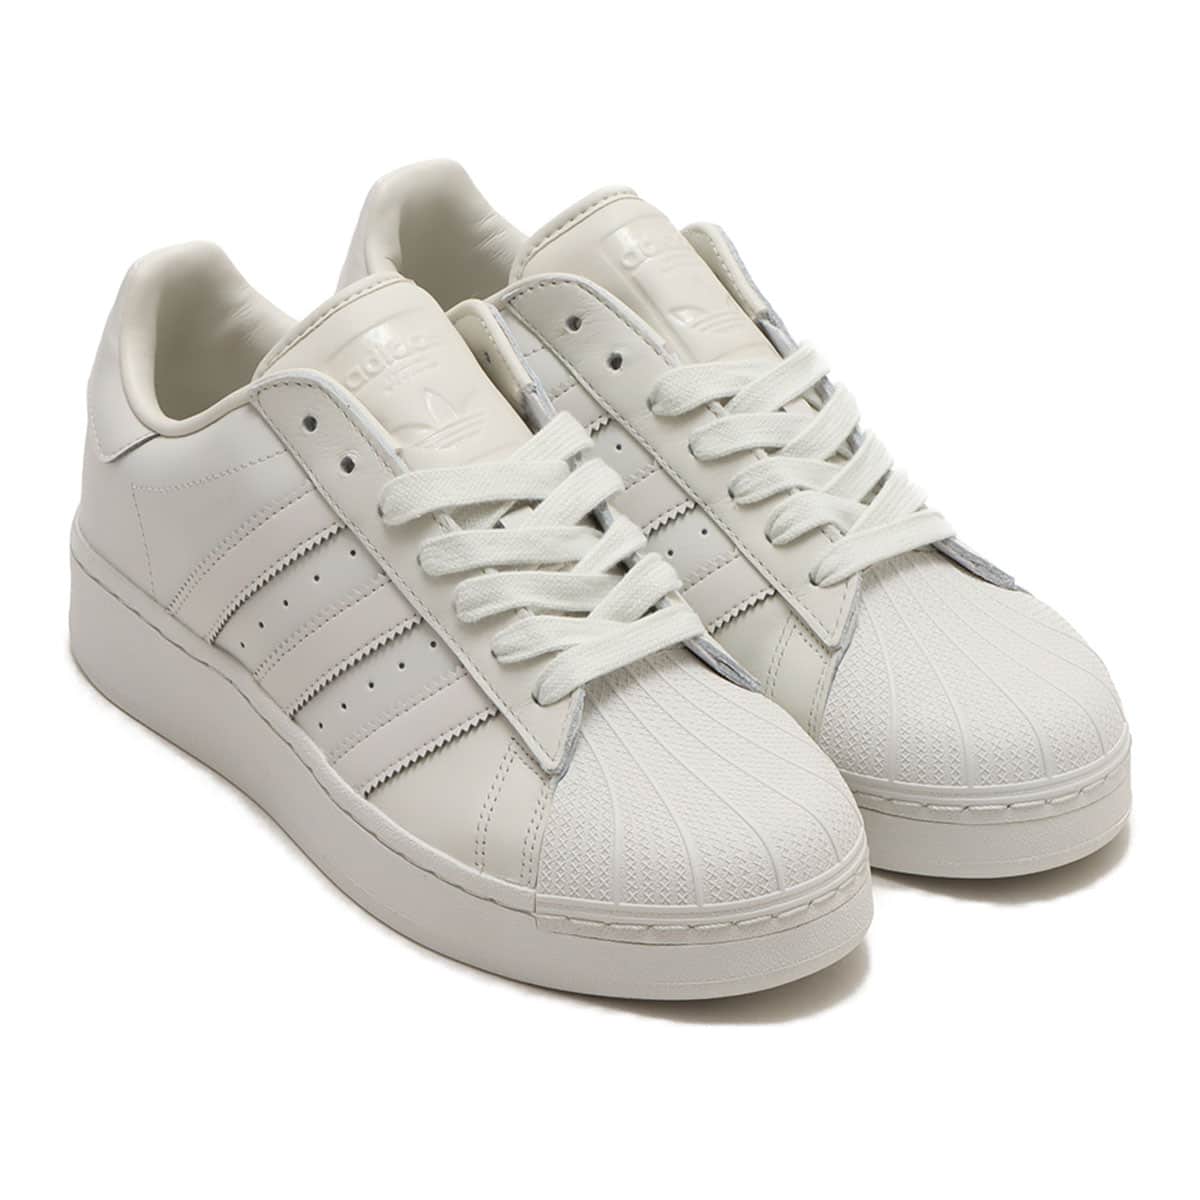 adidas スーパースター XLG / SUPERSTAR XLG